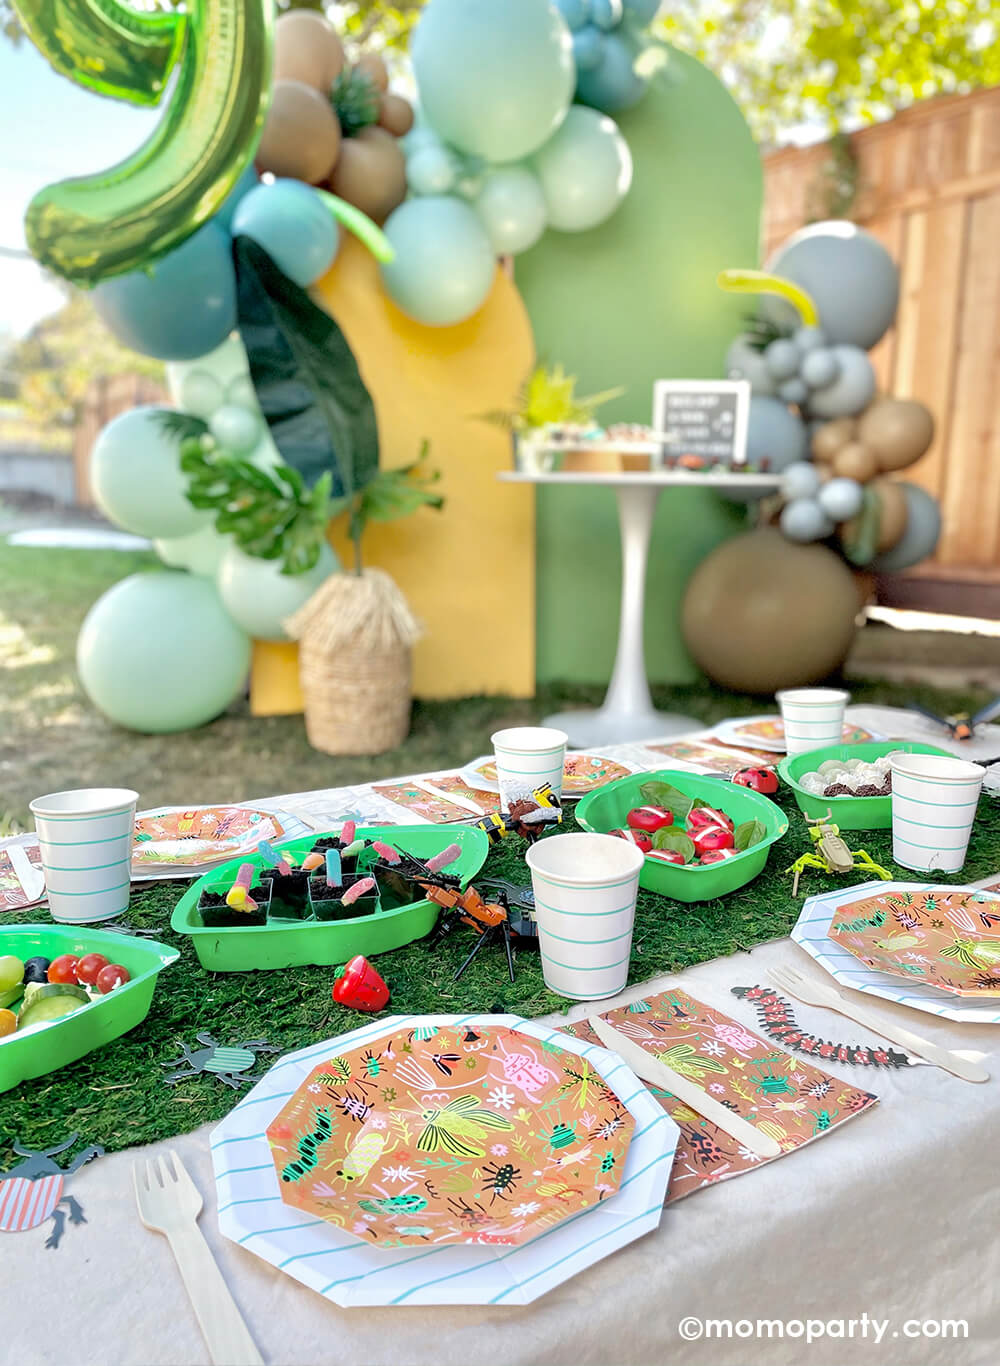 An insect bug themed birthday party table styled by Momo Party features backyard bug plates, napkins with aqua striped plates and party cups by Daydream Society. In the middle there's a faux grass table runner that was decorated with various lego insect toys and palm leaf shaped serving tray filled with insect themed treats and snacks including gummy worms, ladybug cheeses, with a balloon backdrop in green, yellow and brown setting a natural tone for this bug themed party.